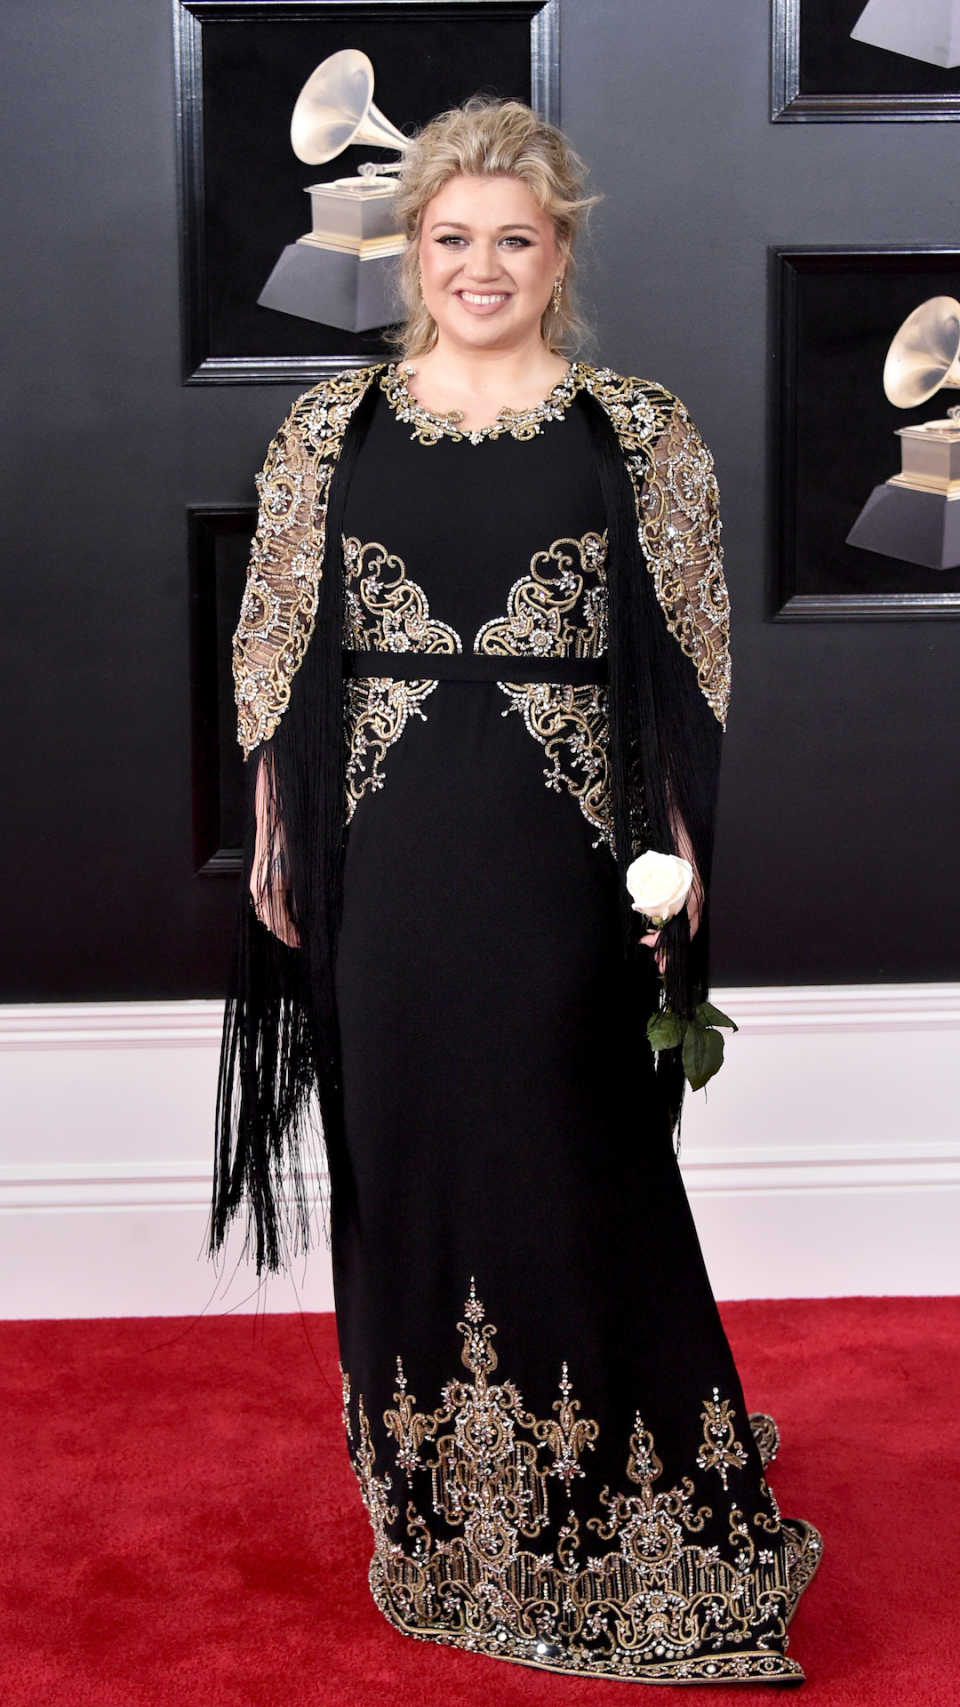 The embroidered Grammys dress